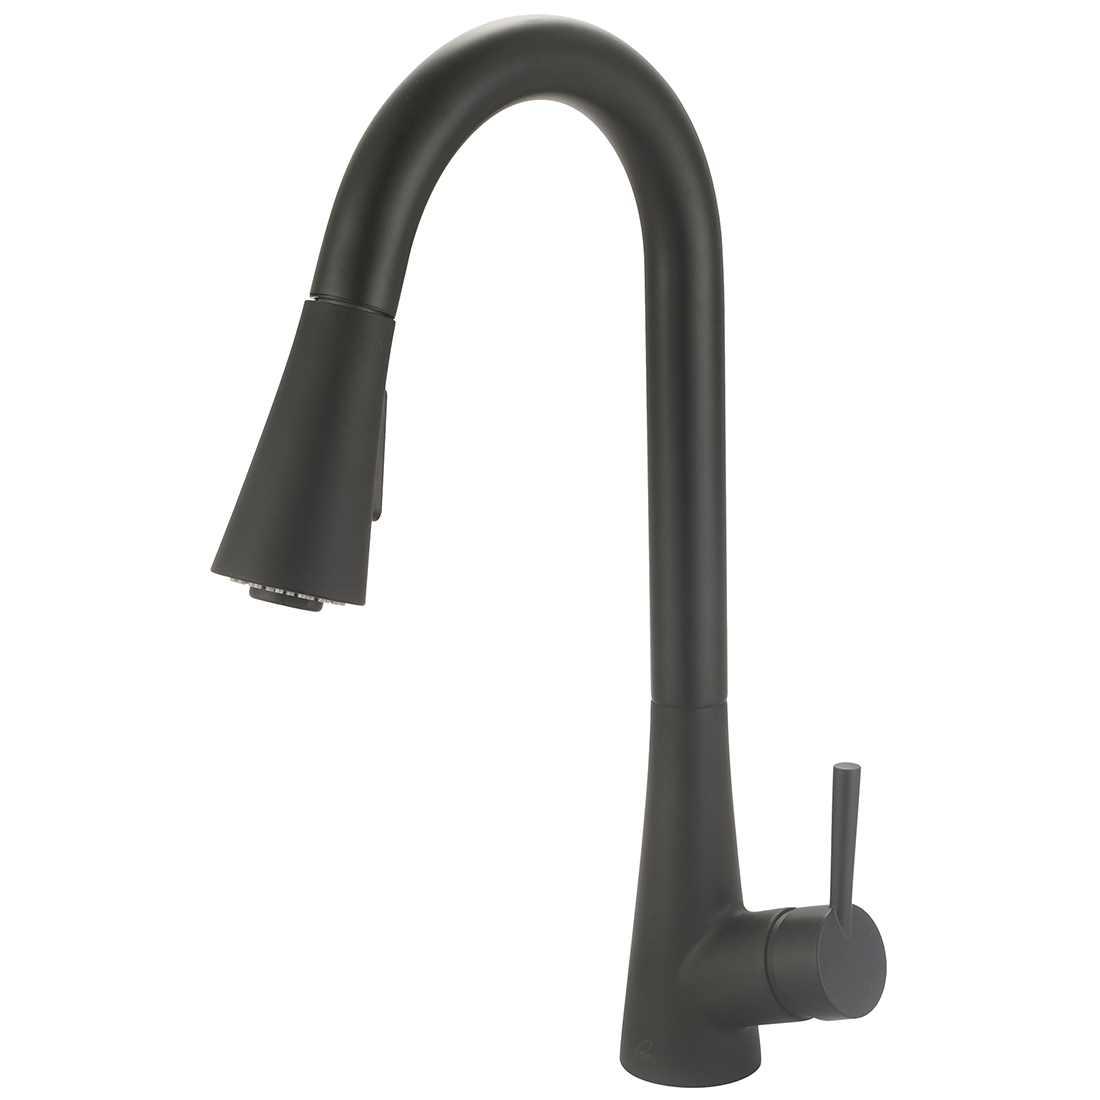 i2 Olympia Single Handle Pull-Down Kitchen Faucet Model# K-5020